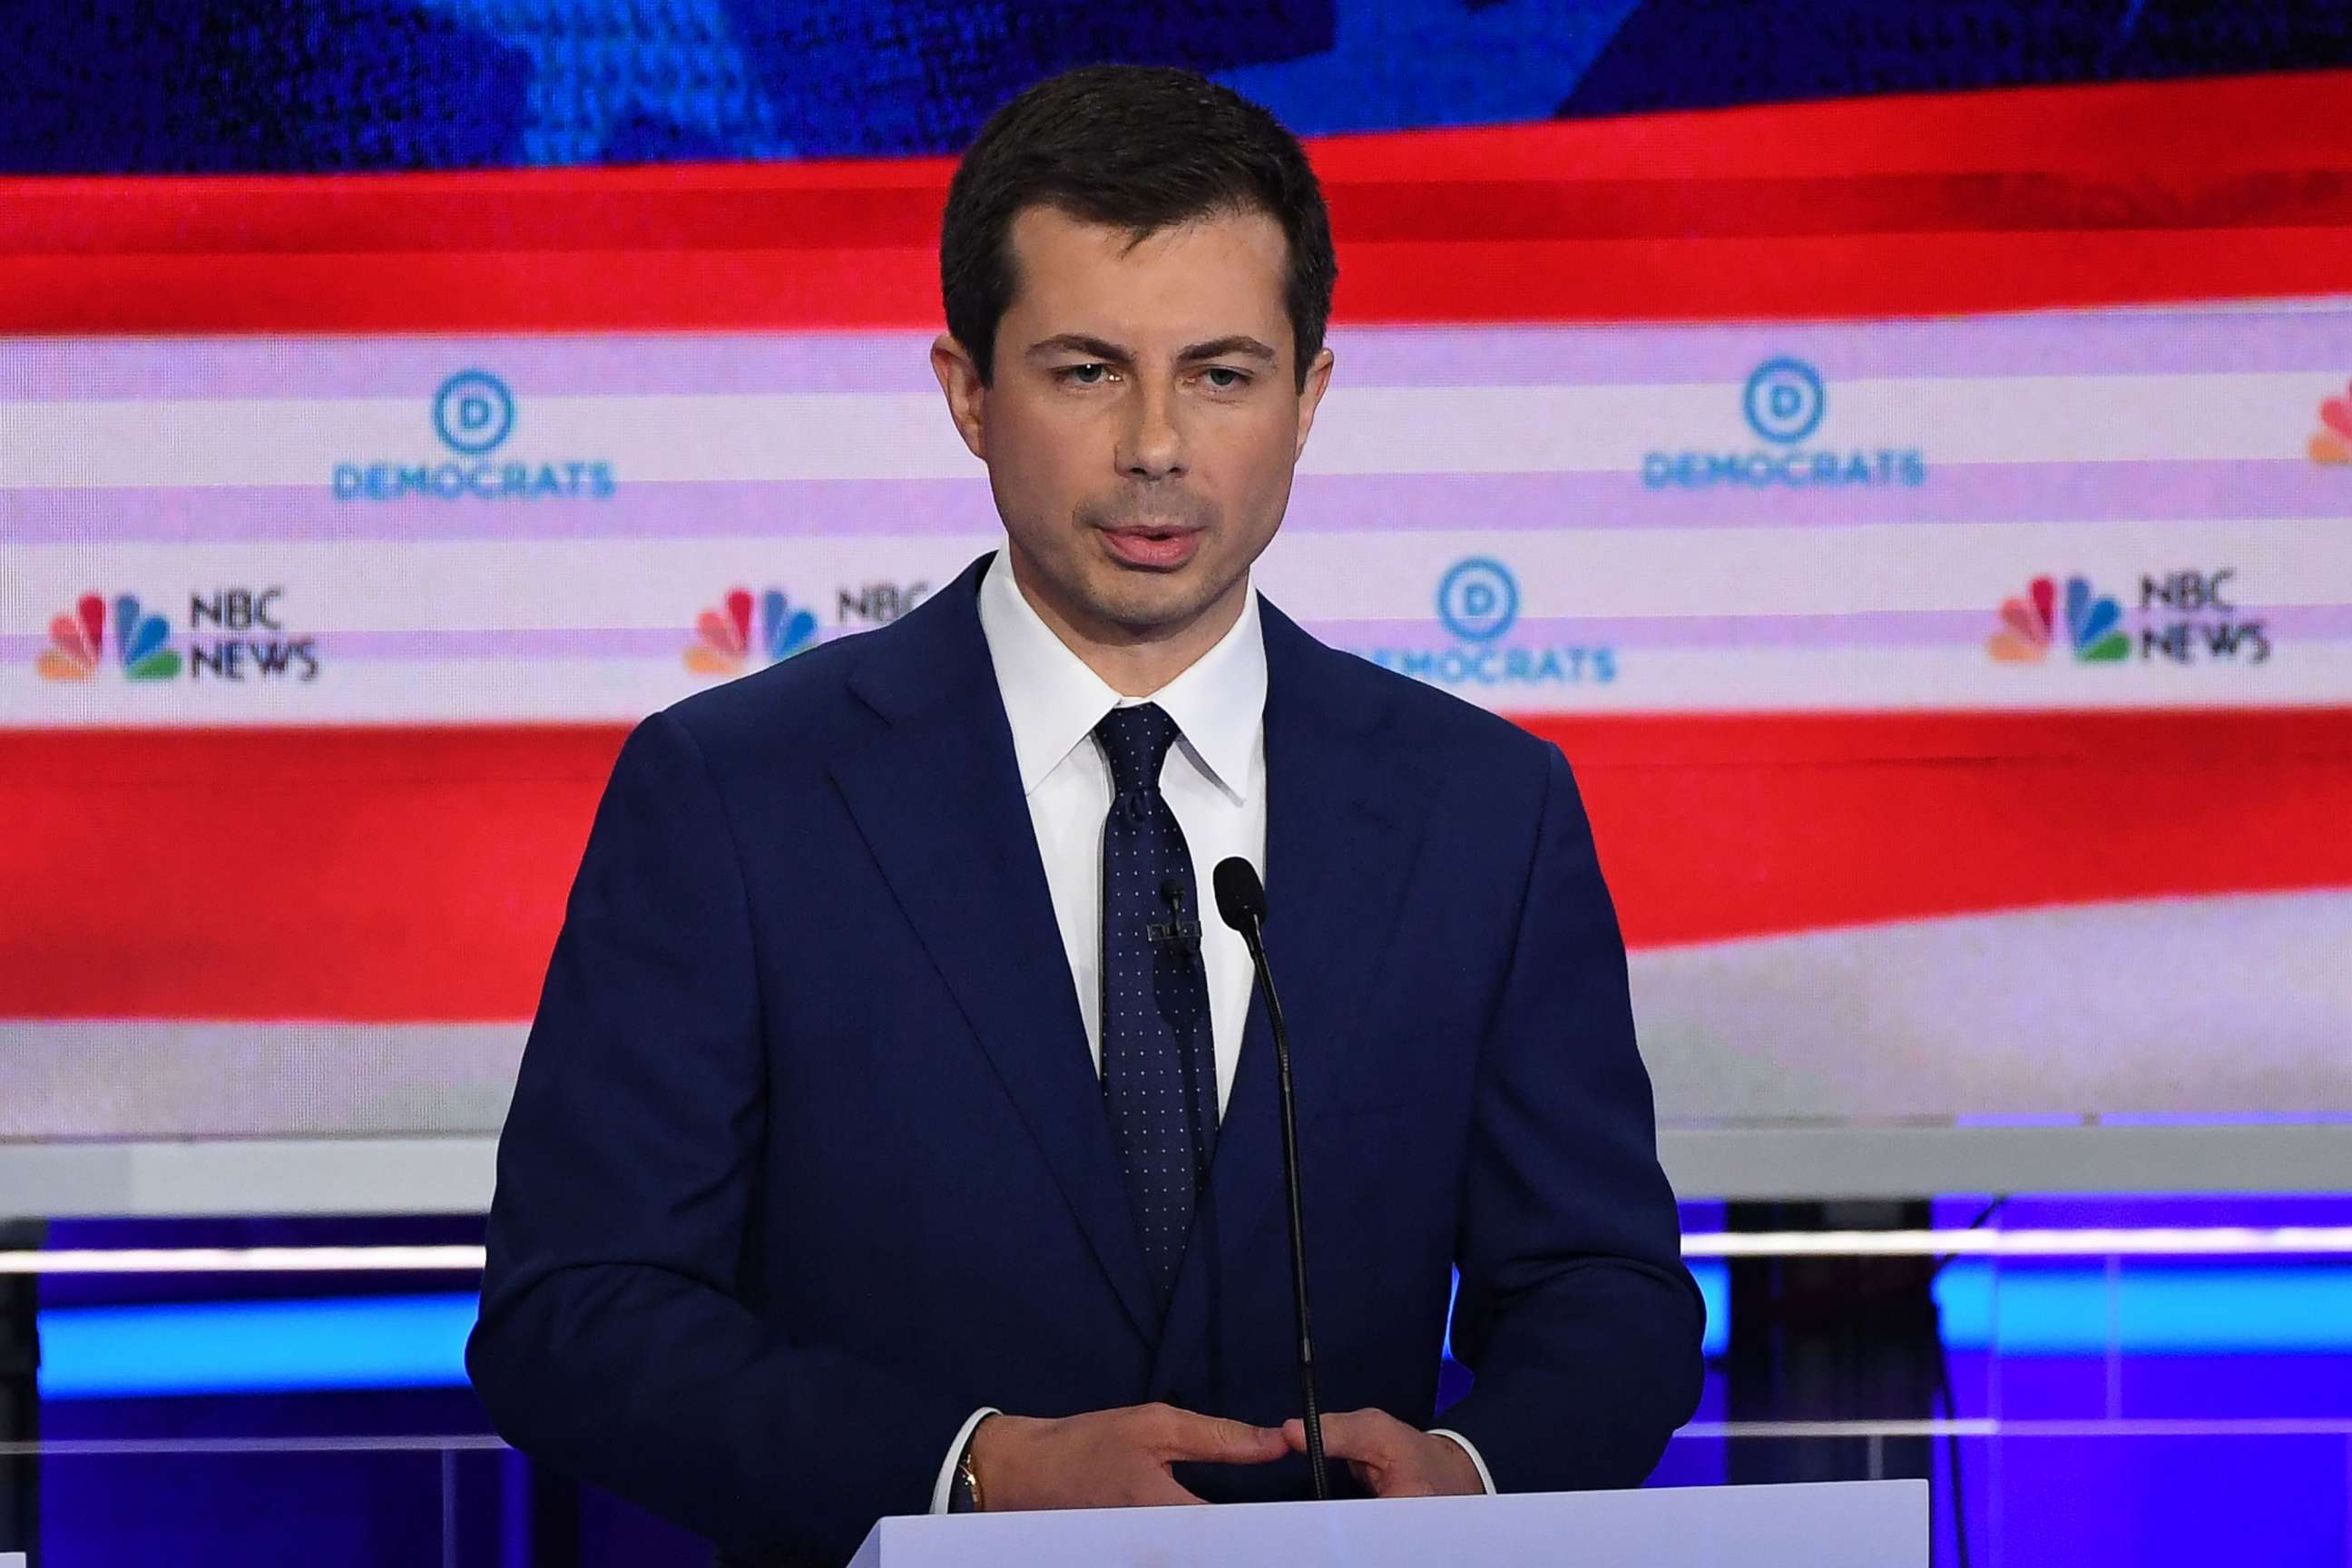 PHOTO: Pete Buttigieg participates in the second night of the first 2020 democratic presidential debate at the Adrienne Arsht Center for the Performing Arts in Miami, June 27, 2019.